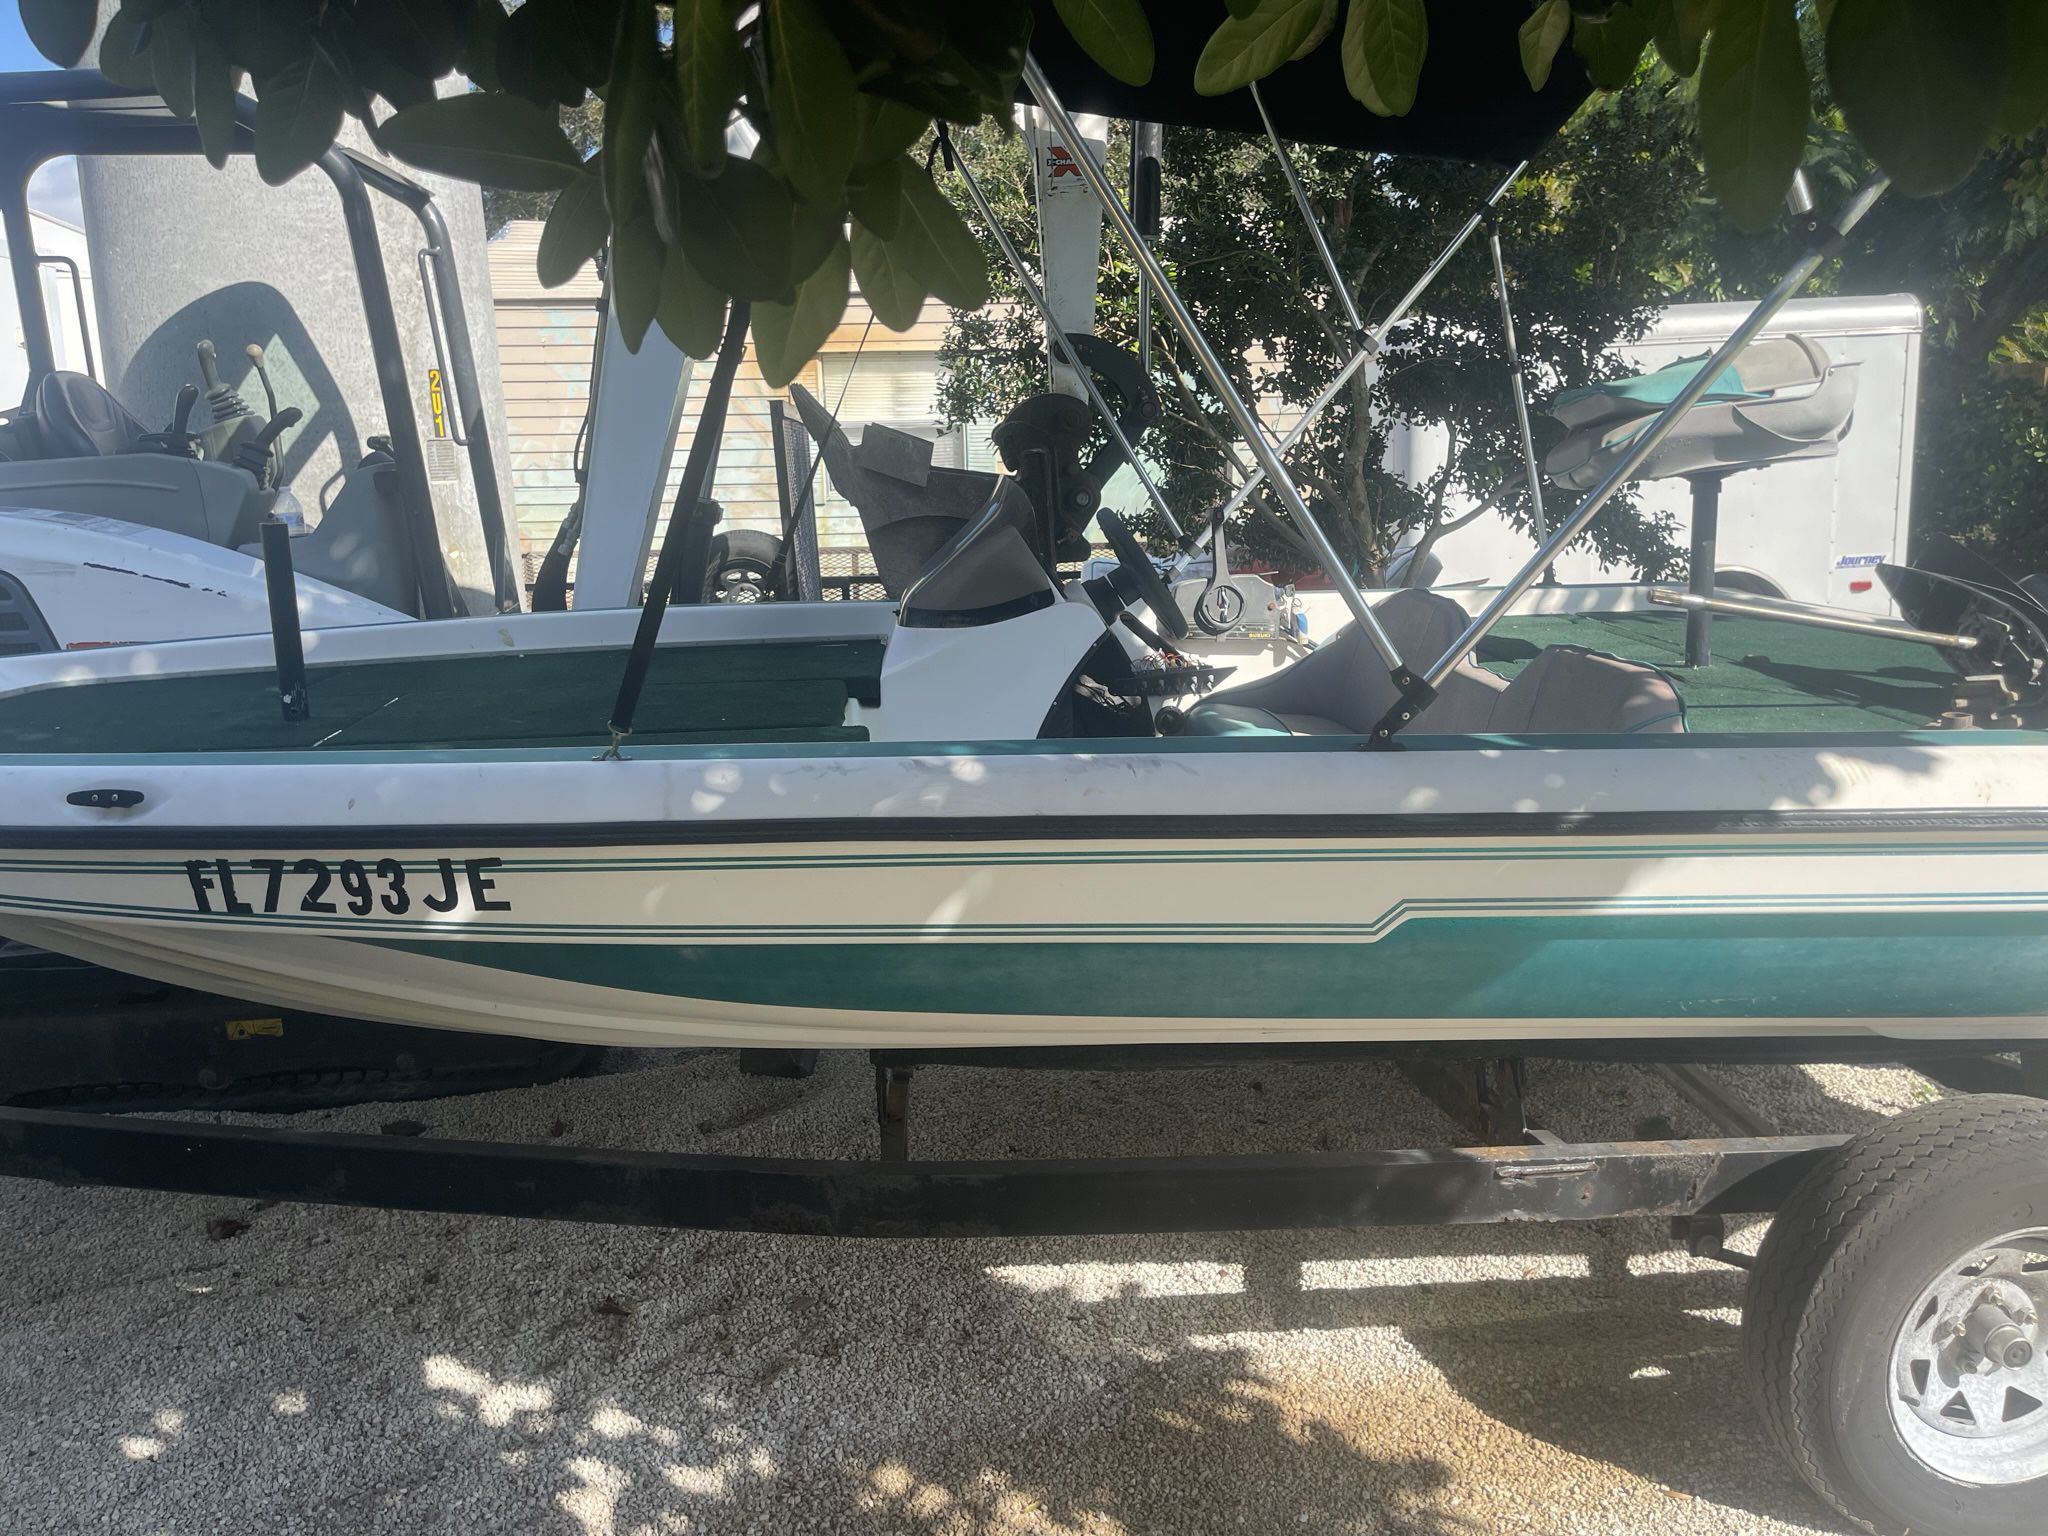 17 Ft Bass Boat and Trailer No Motor